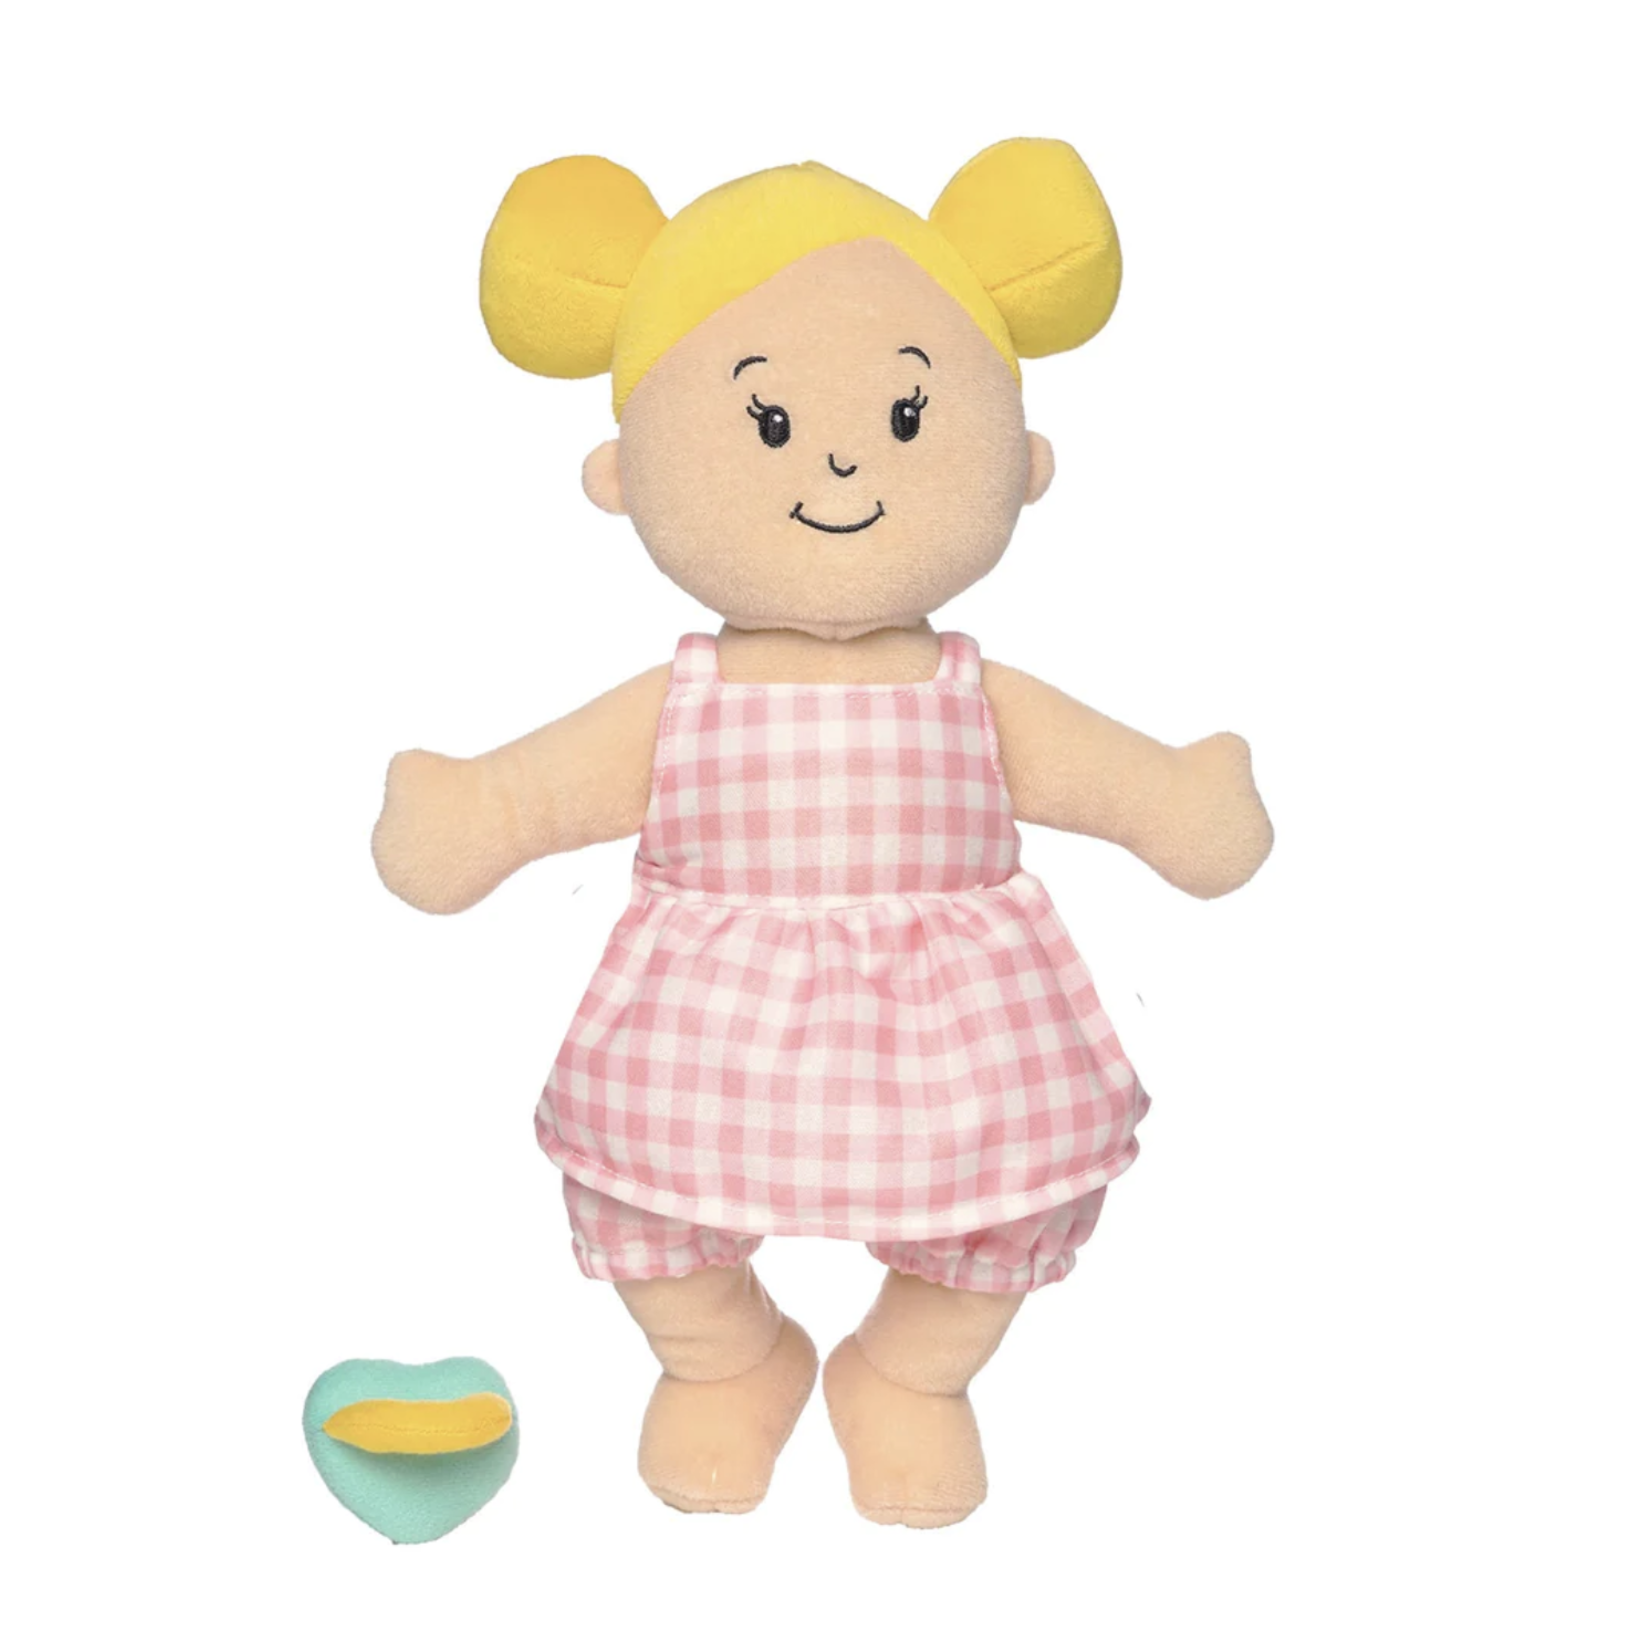 Manhattan Toy Company Wee Baby Stella Doll-Peach with Blonde Buns